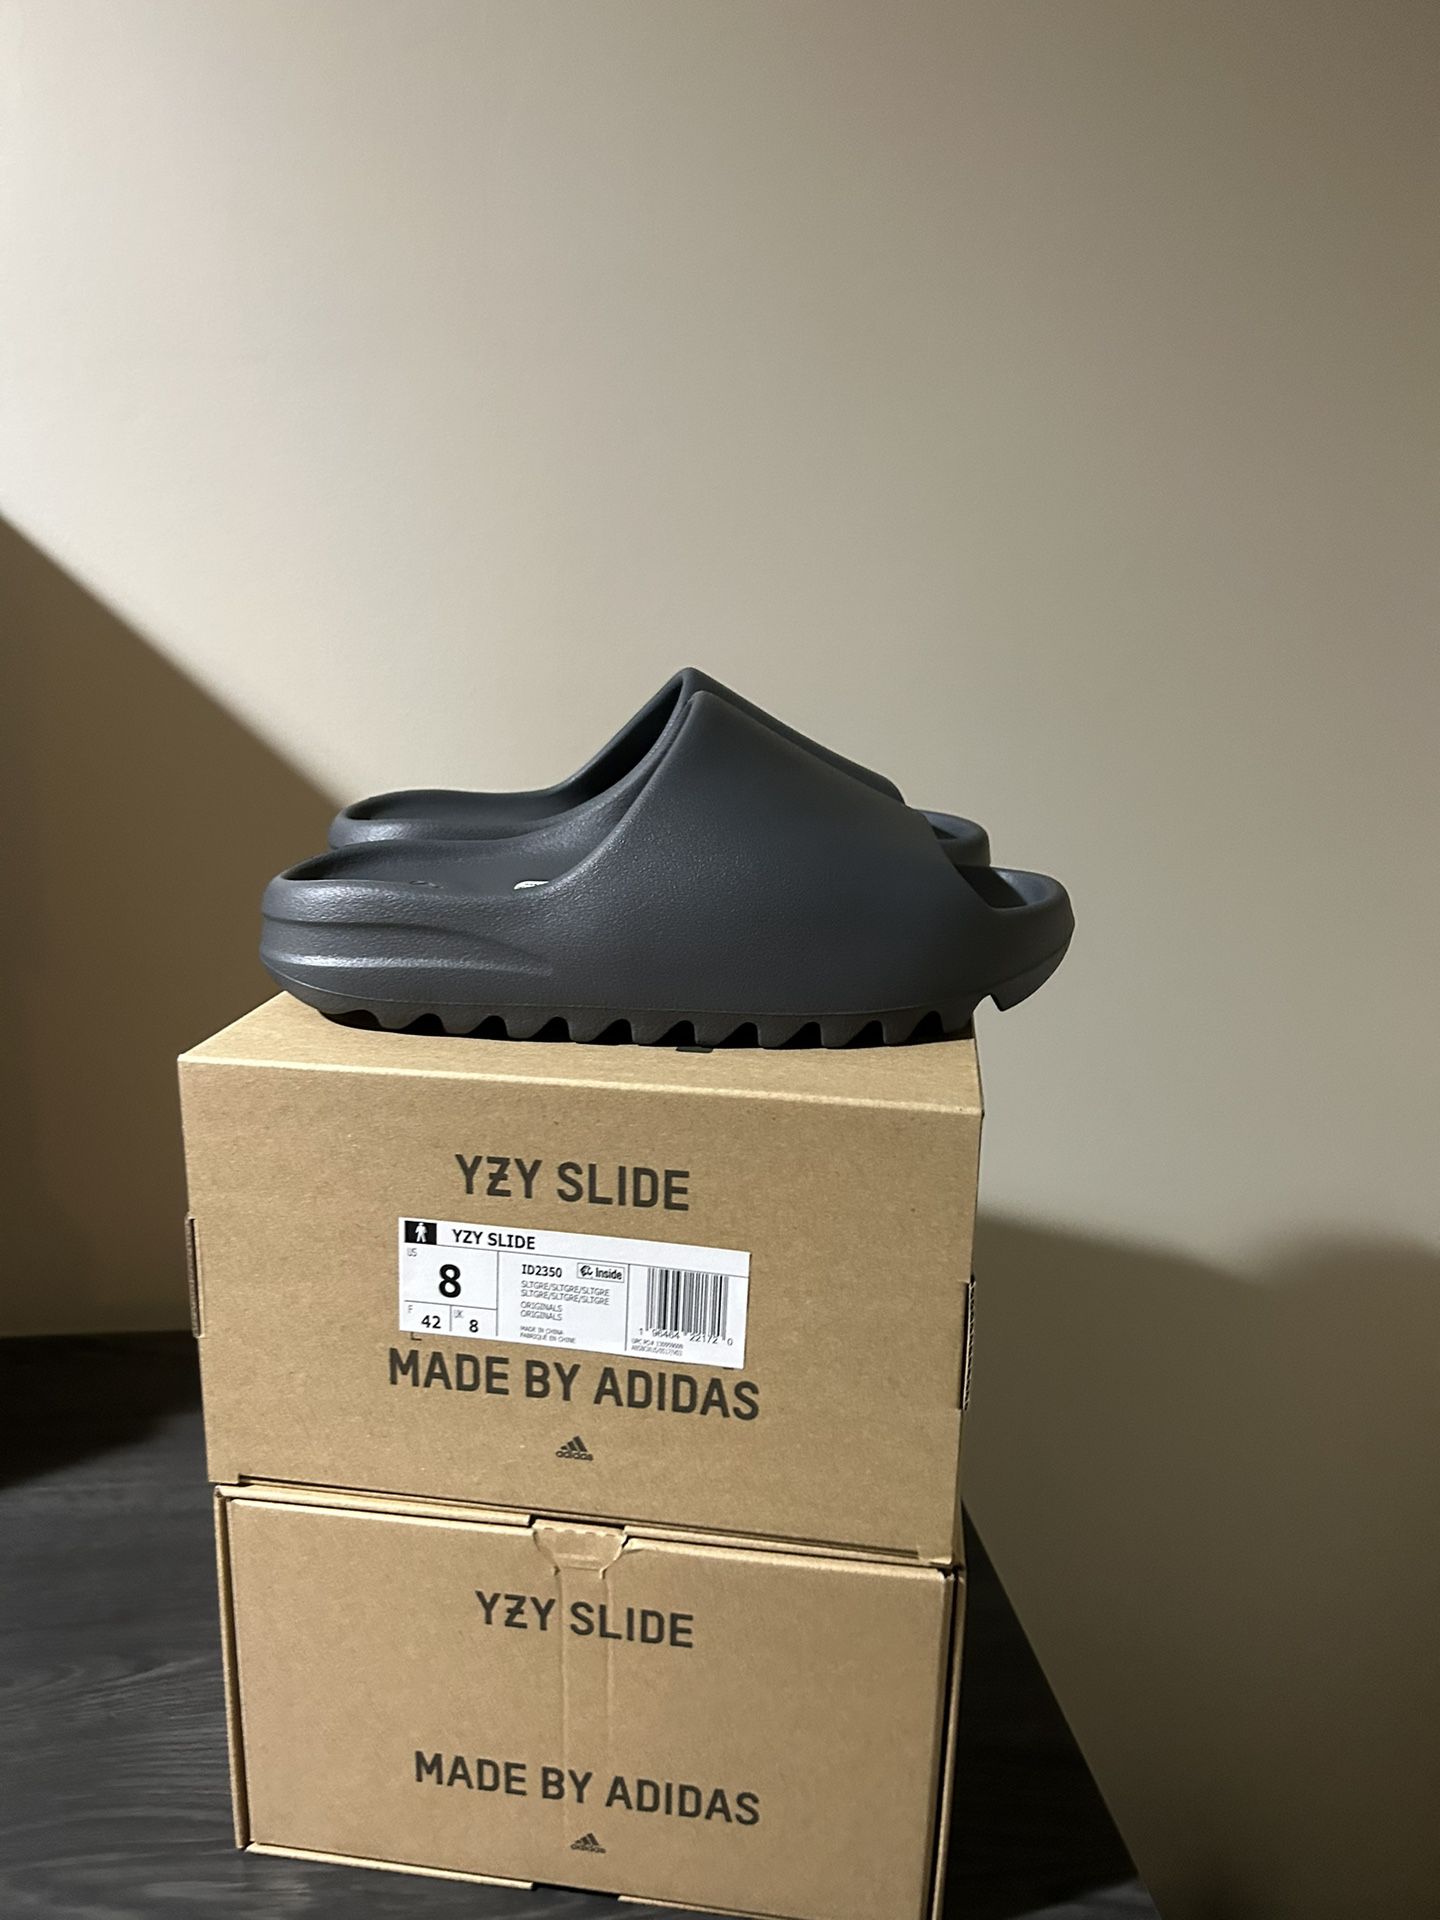 Slate Grey Yeezy Slides for Sale in Chicago, IL - OfferUp